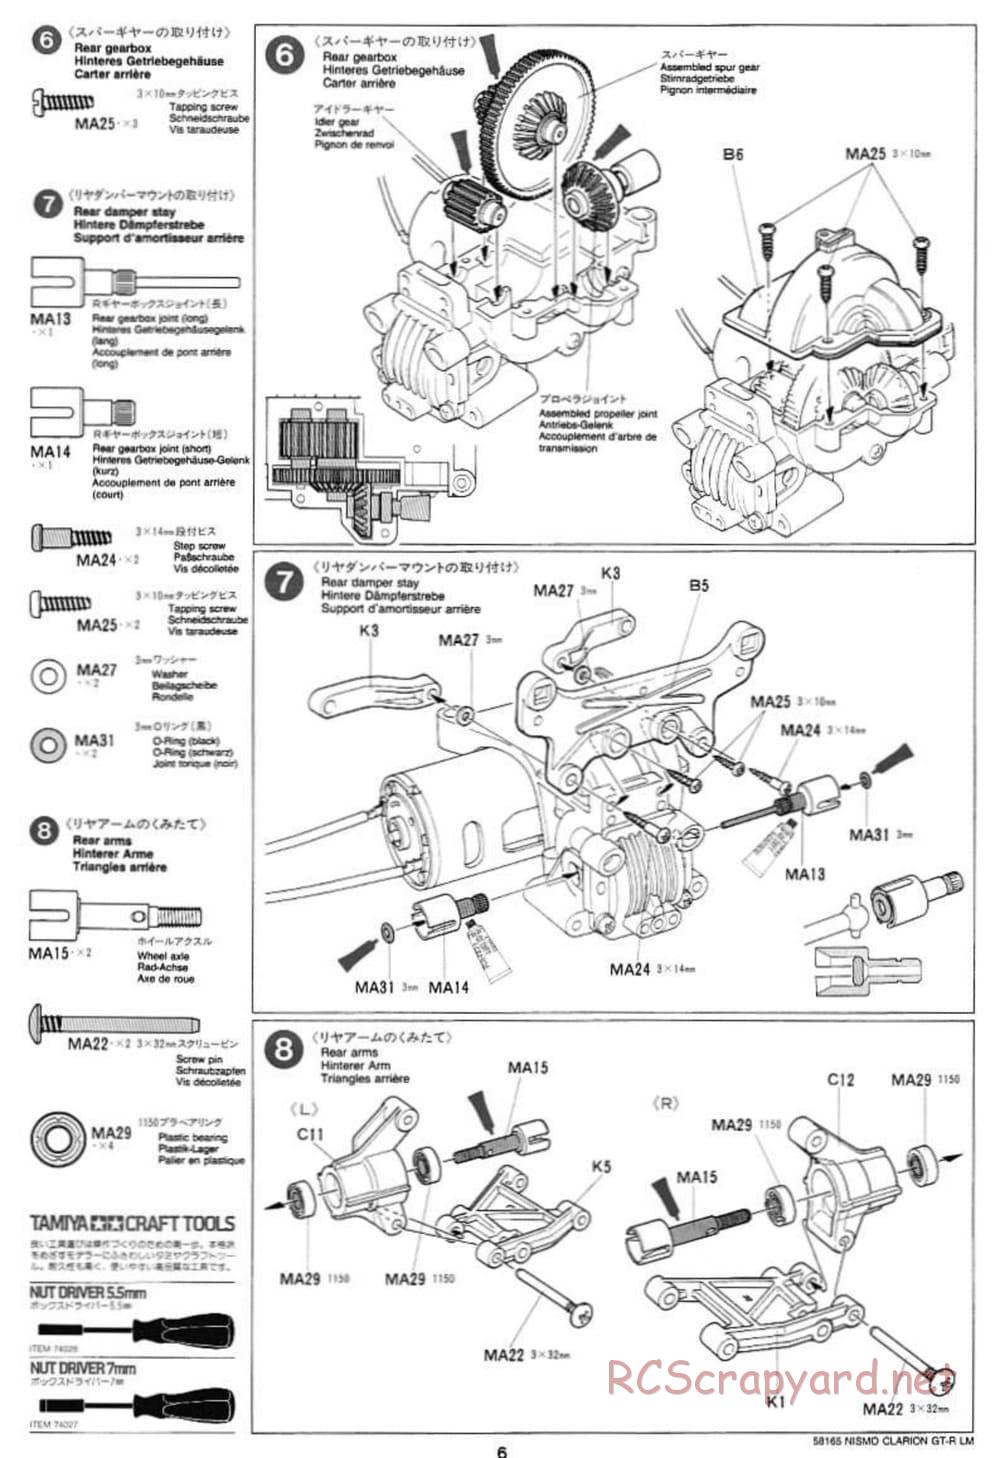 Tamiya - Nismo Clarion GT-R LM - TA-02W Chassis - Manual - Page 6